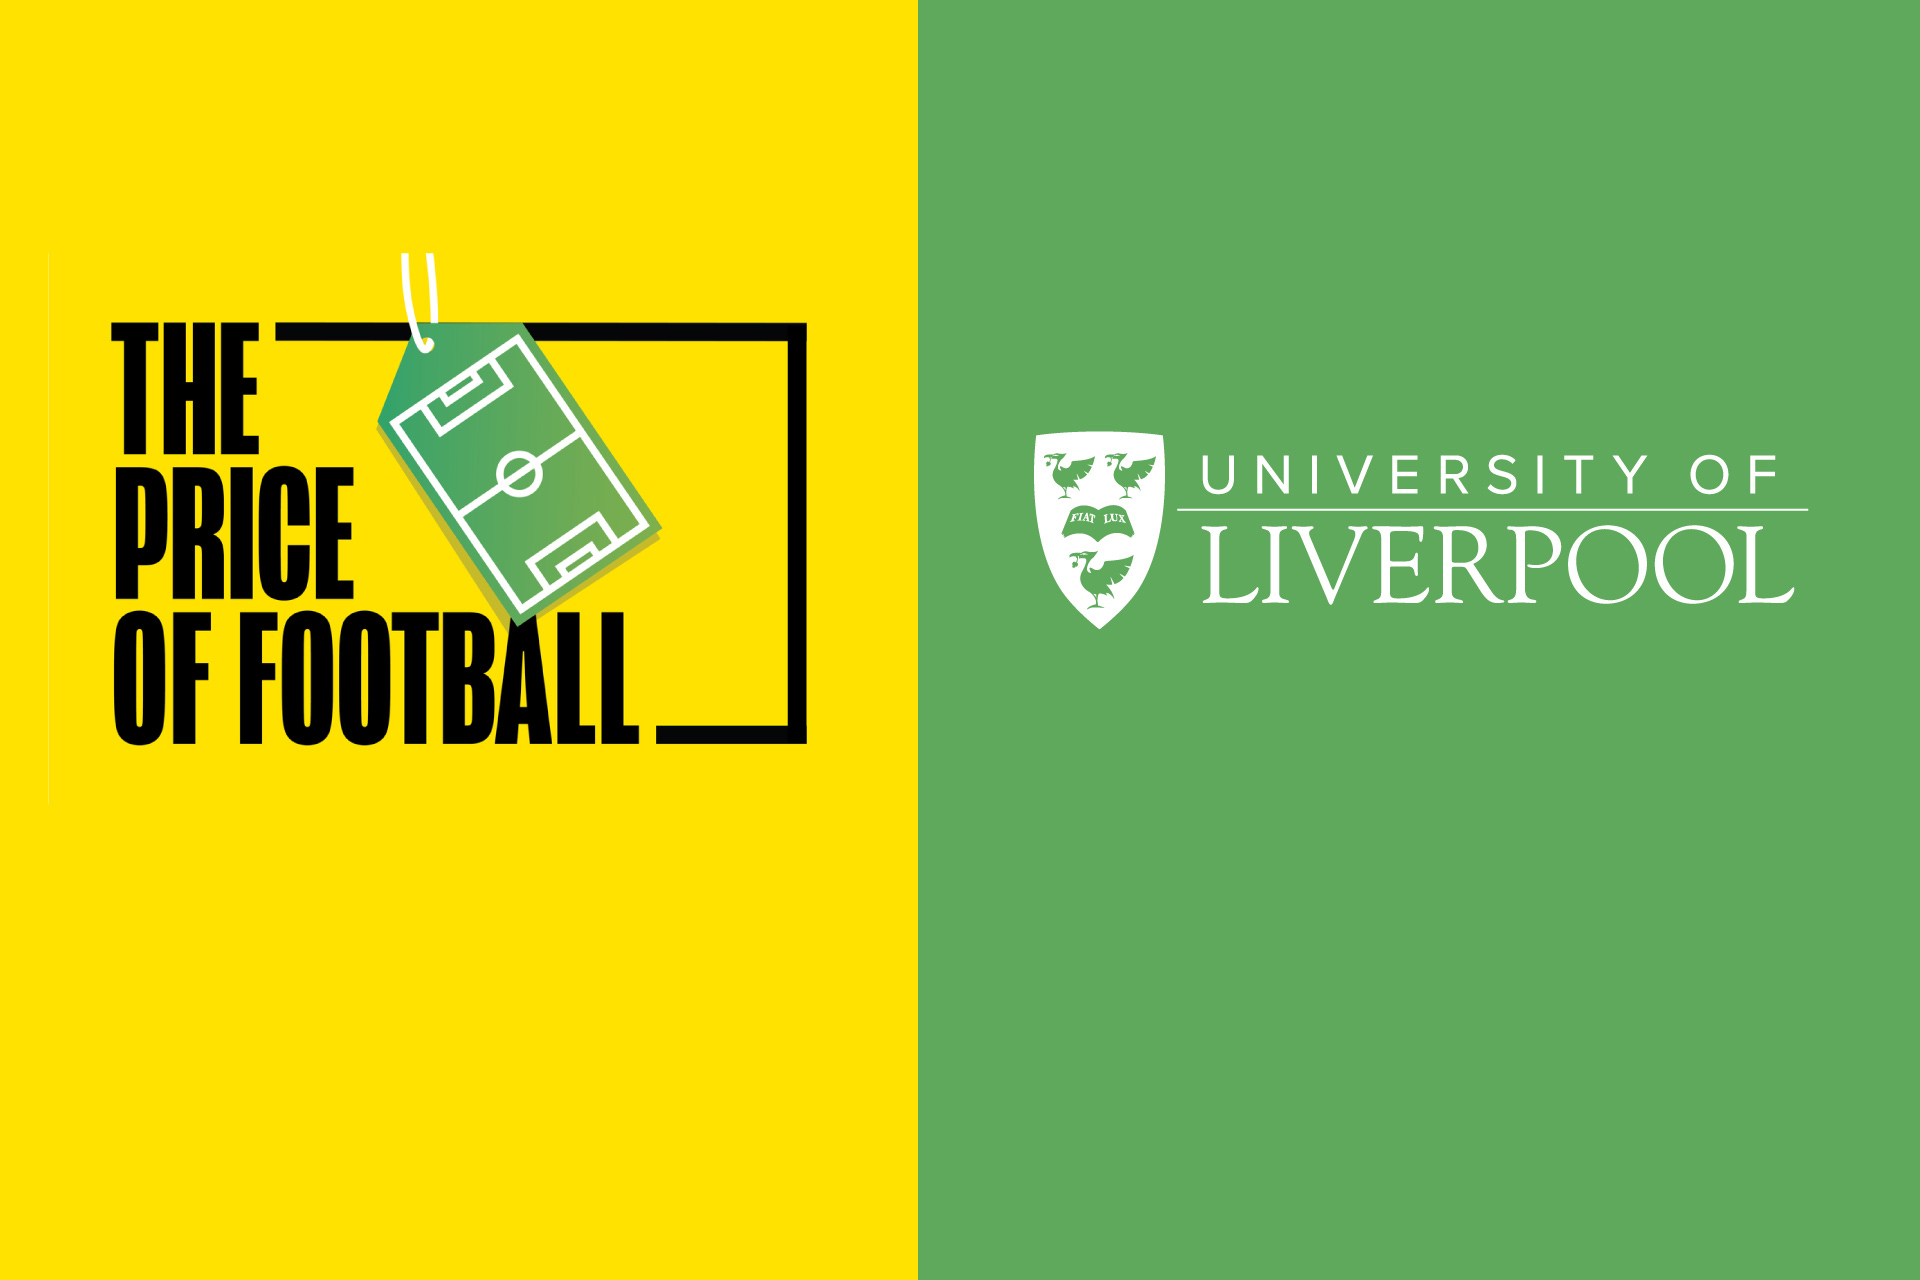 Price of Football Live podcast at University of Liverpool